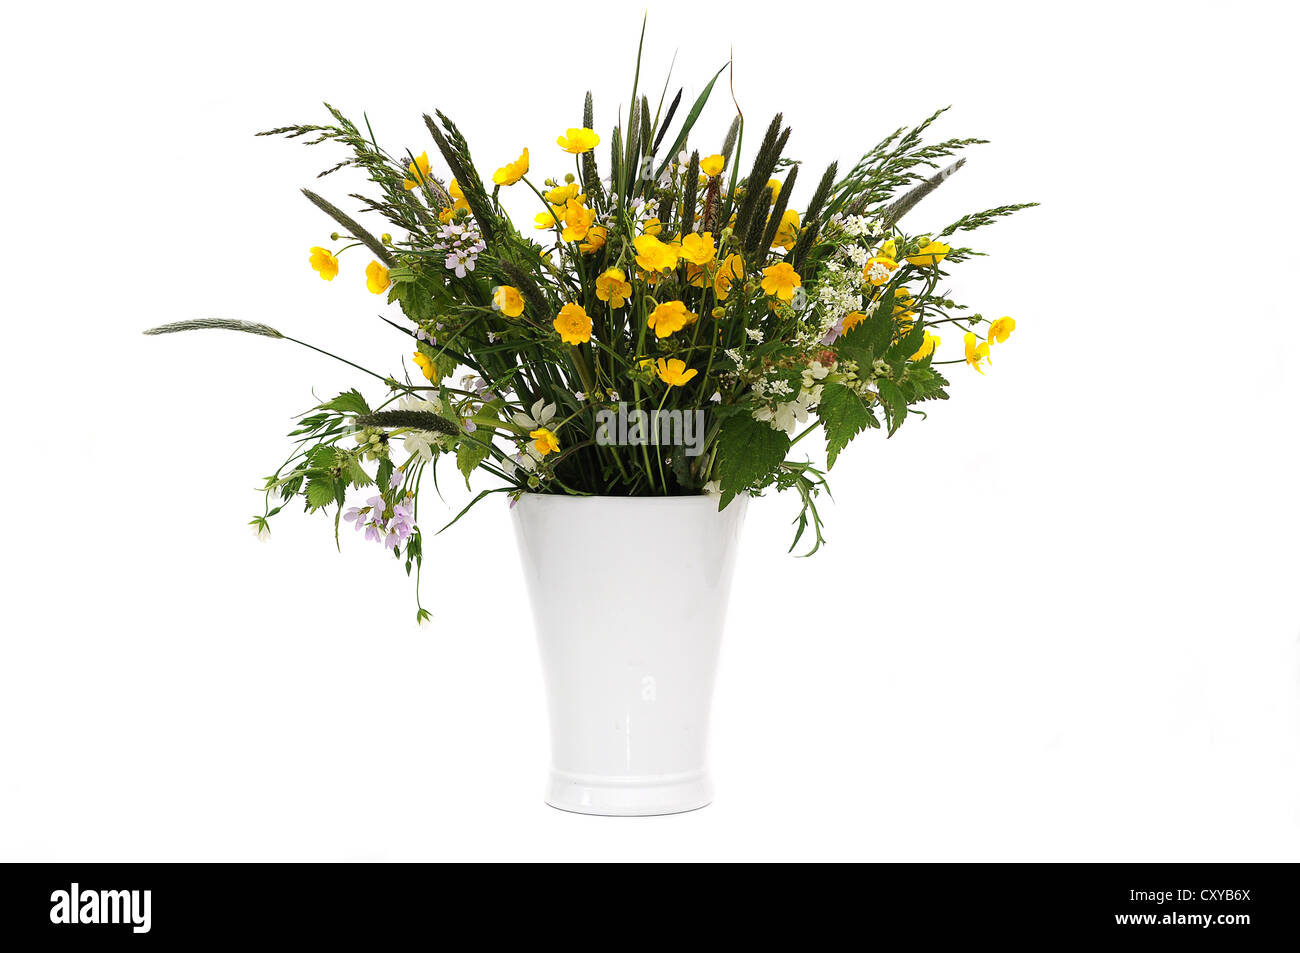 Bunch of field flowers with buttercups (Ranunculus acris) in a white vase Stock Photo